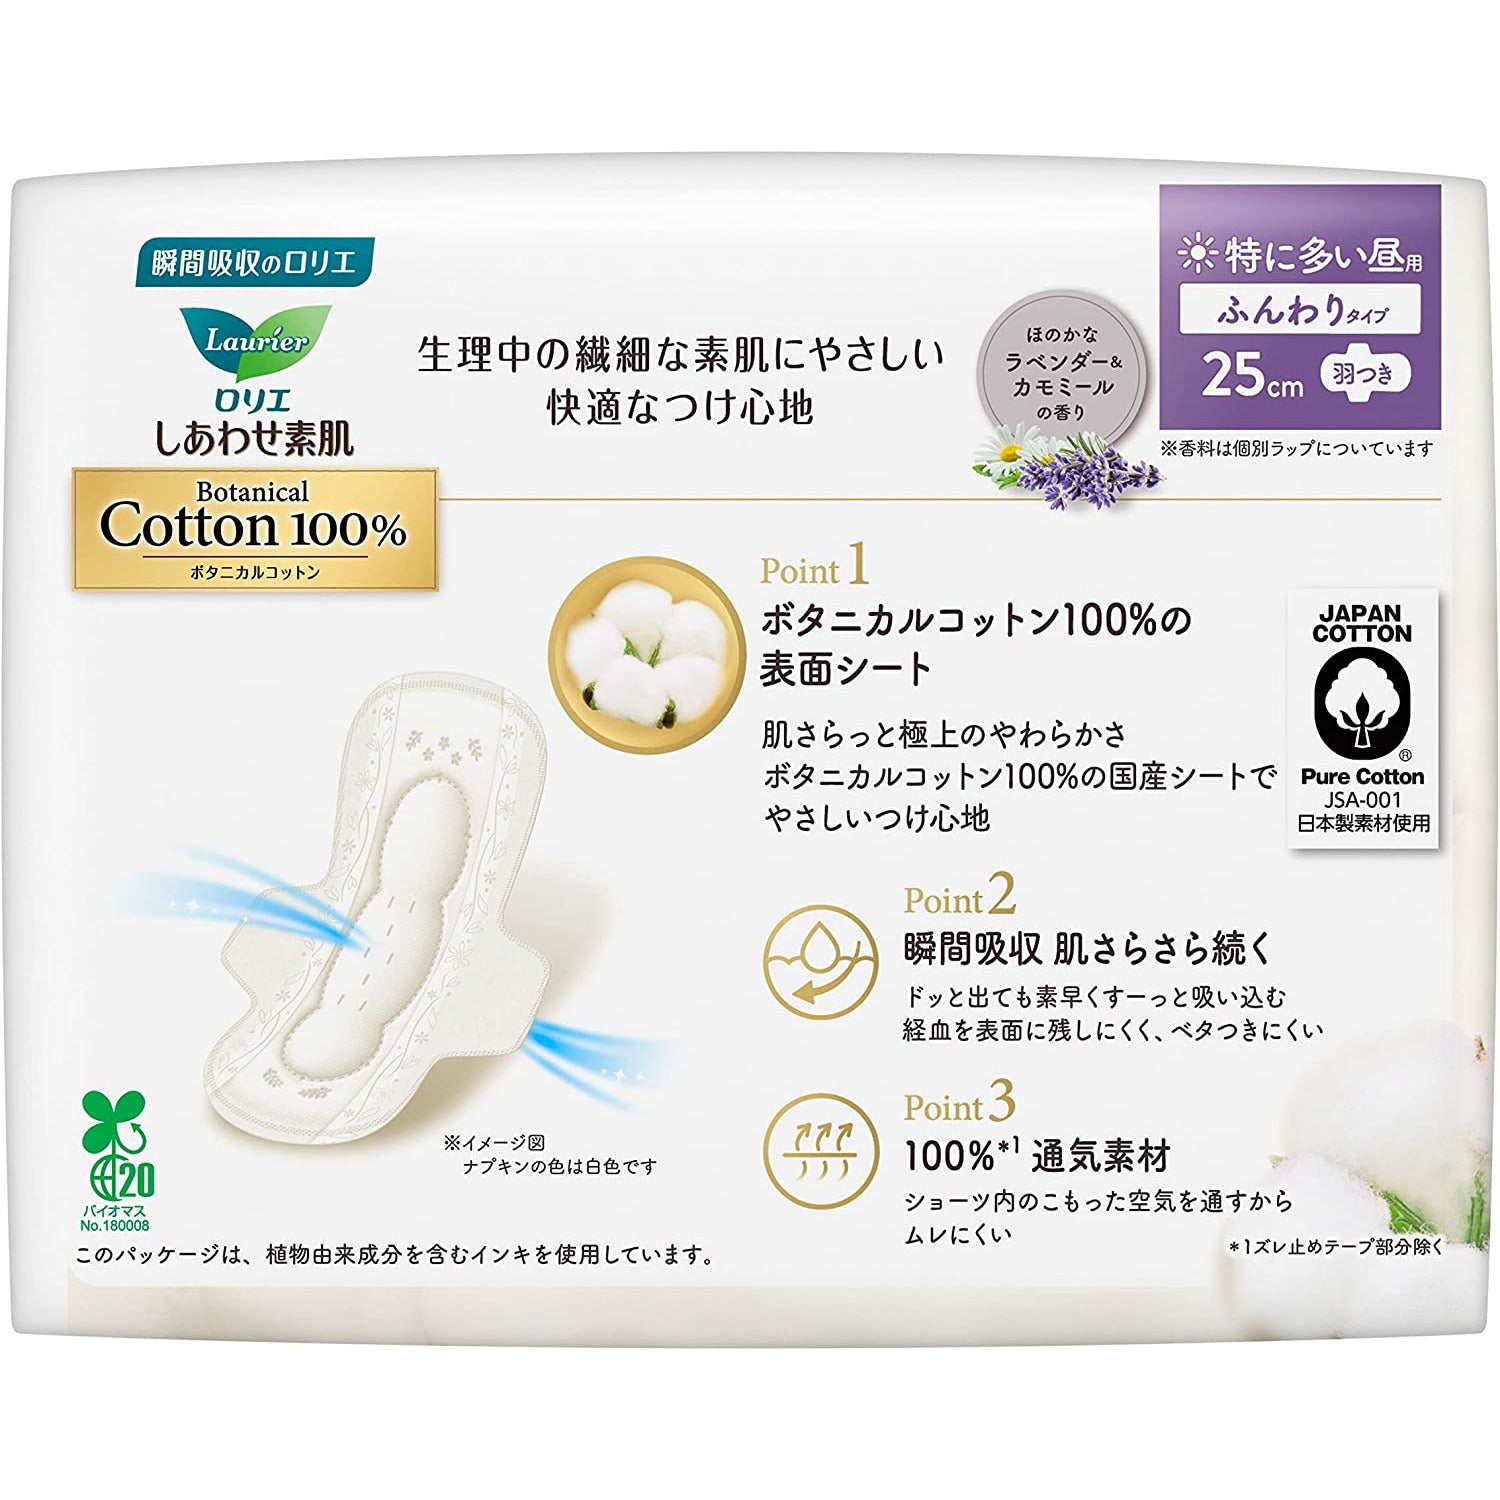 Kao Laurier Shiawase Bare Skin Botanical Cotton 100% napkins 25 cm for especially large daytime with wings 14 pieces